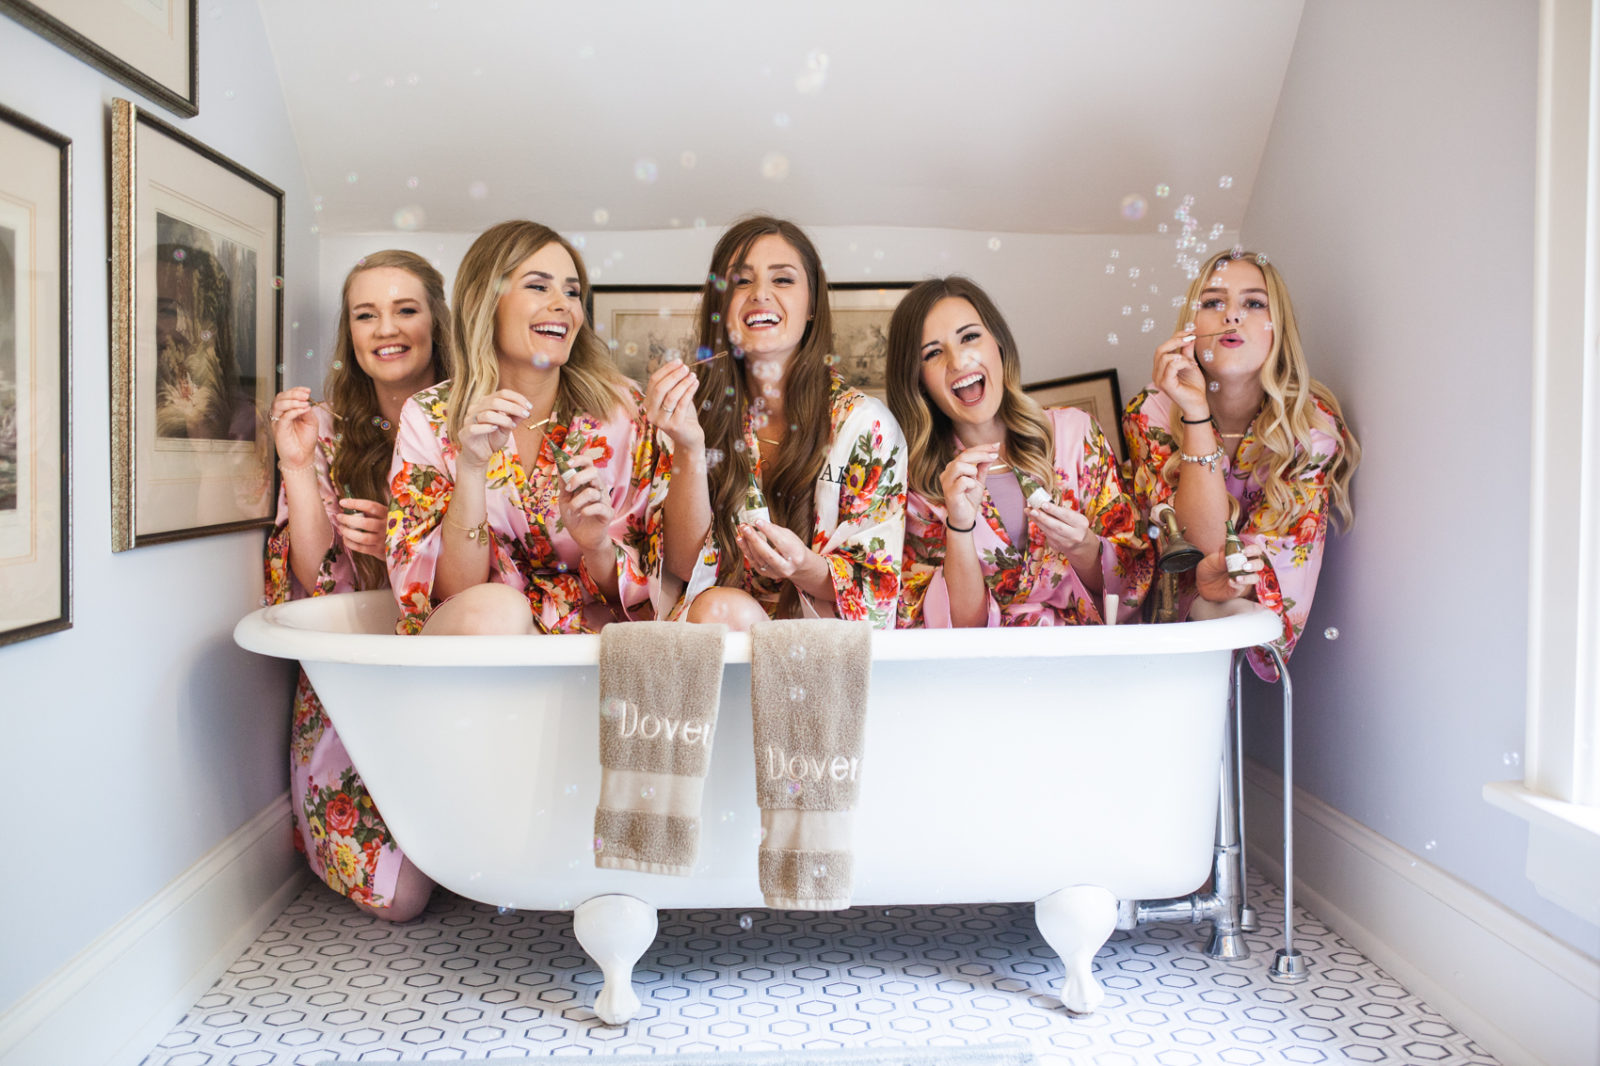 bridesmaids blowing bubbles in a claw foot bath tub